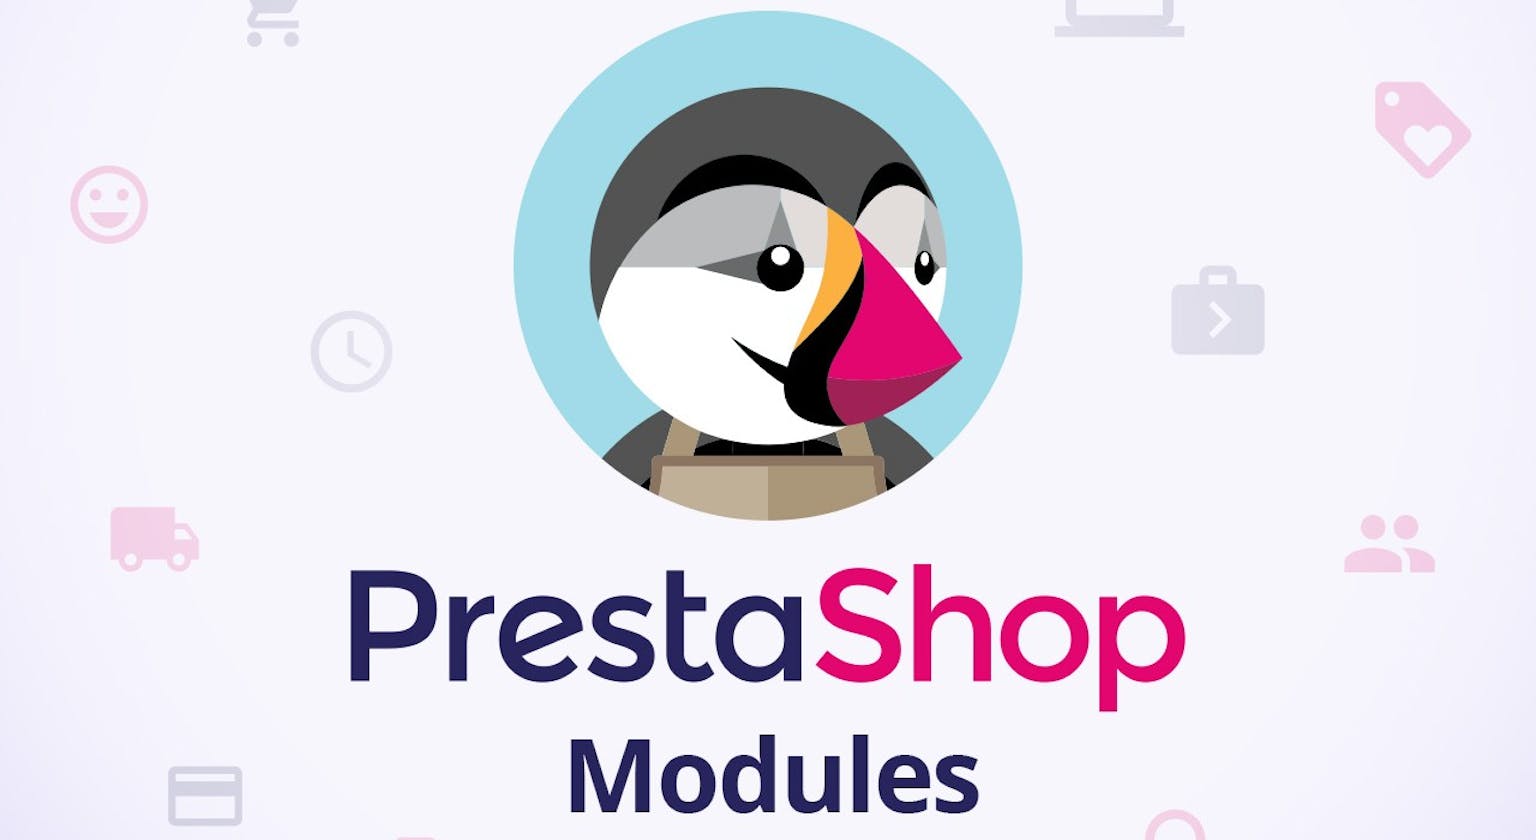 Things you should know before starting Prestashop development